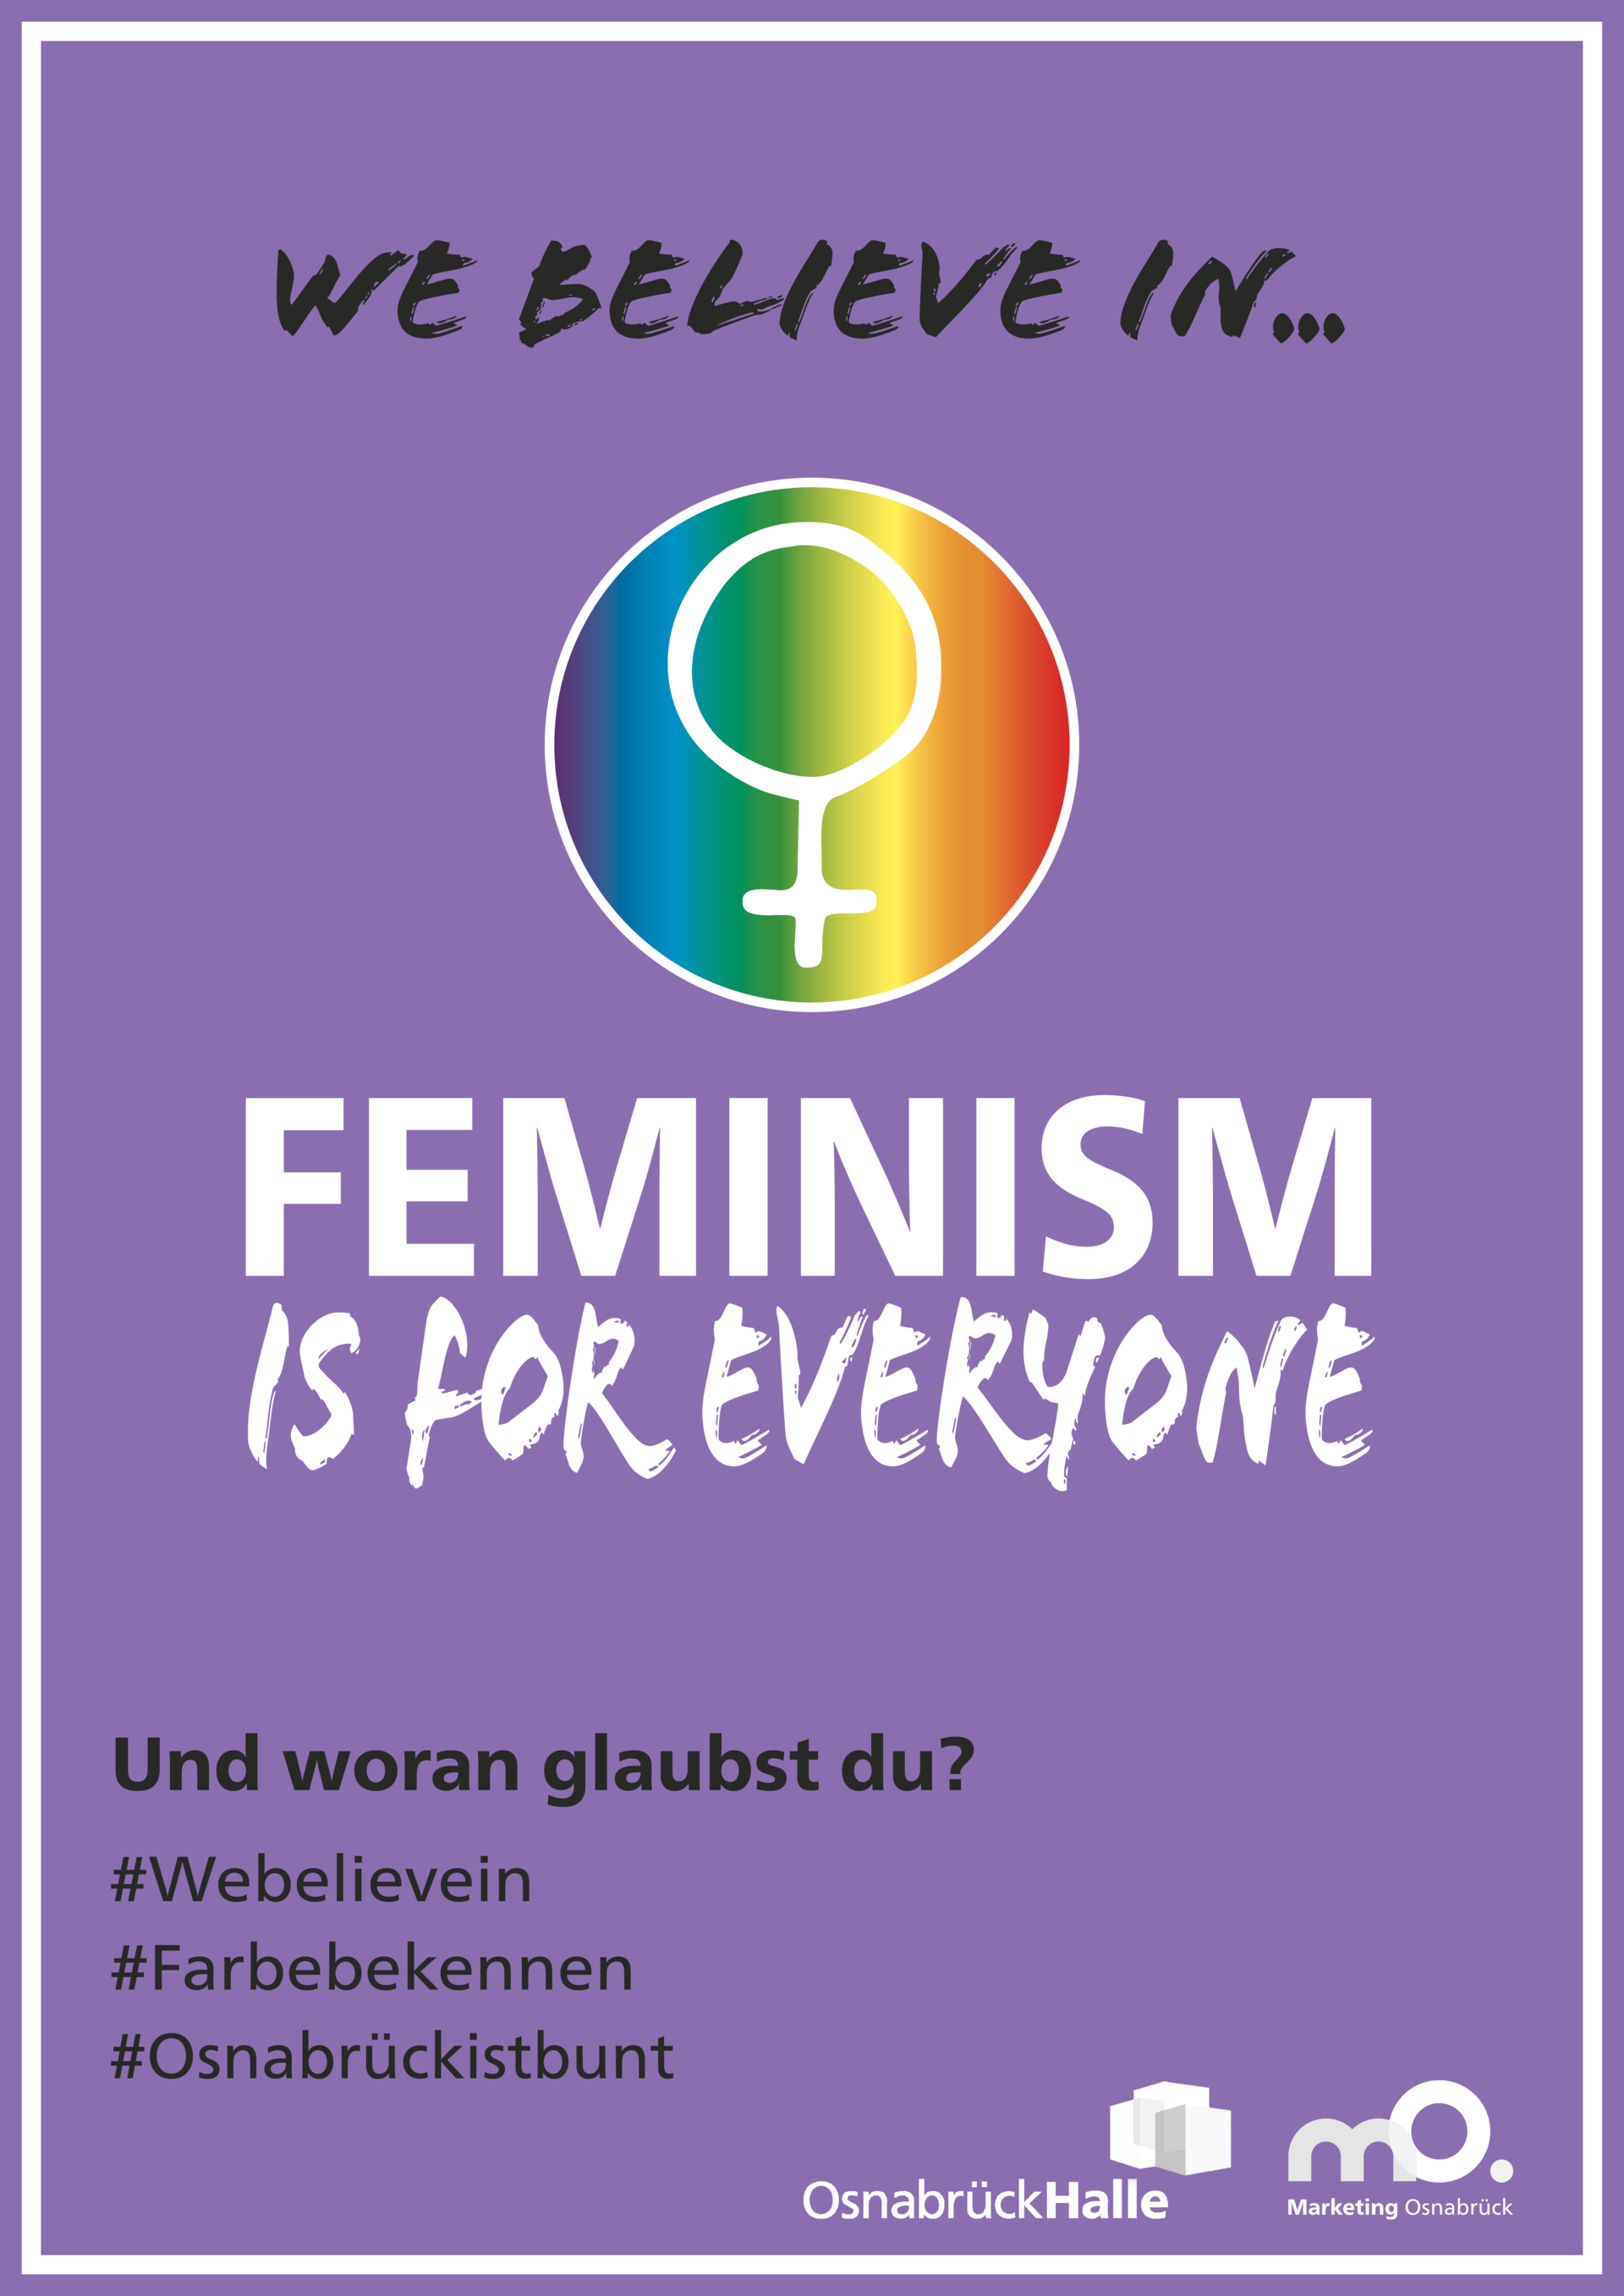 We believe in Feminism is for everybody